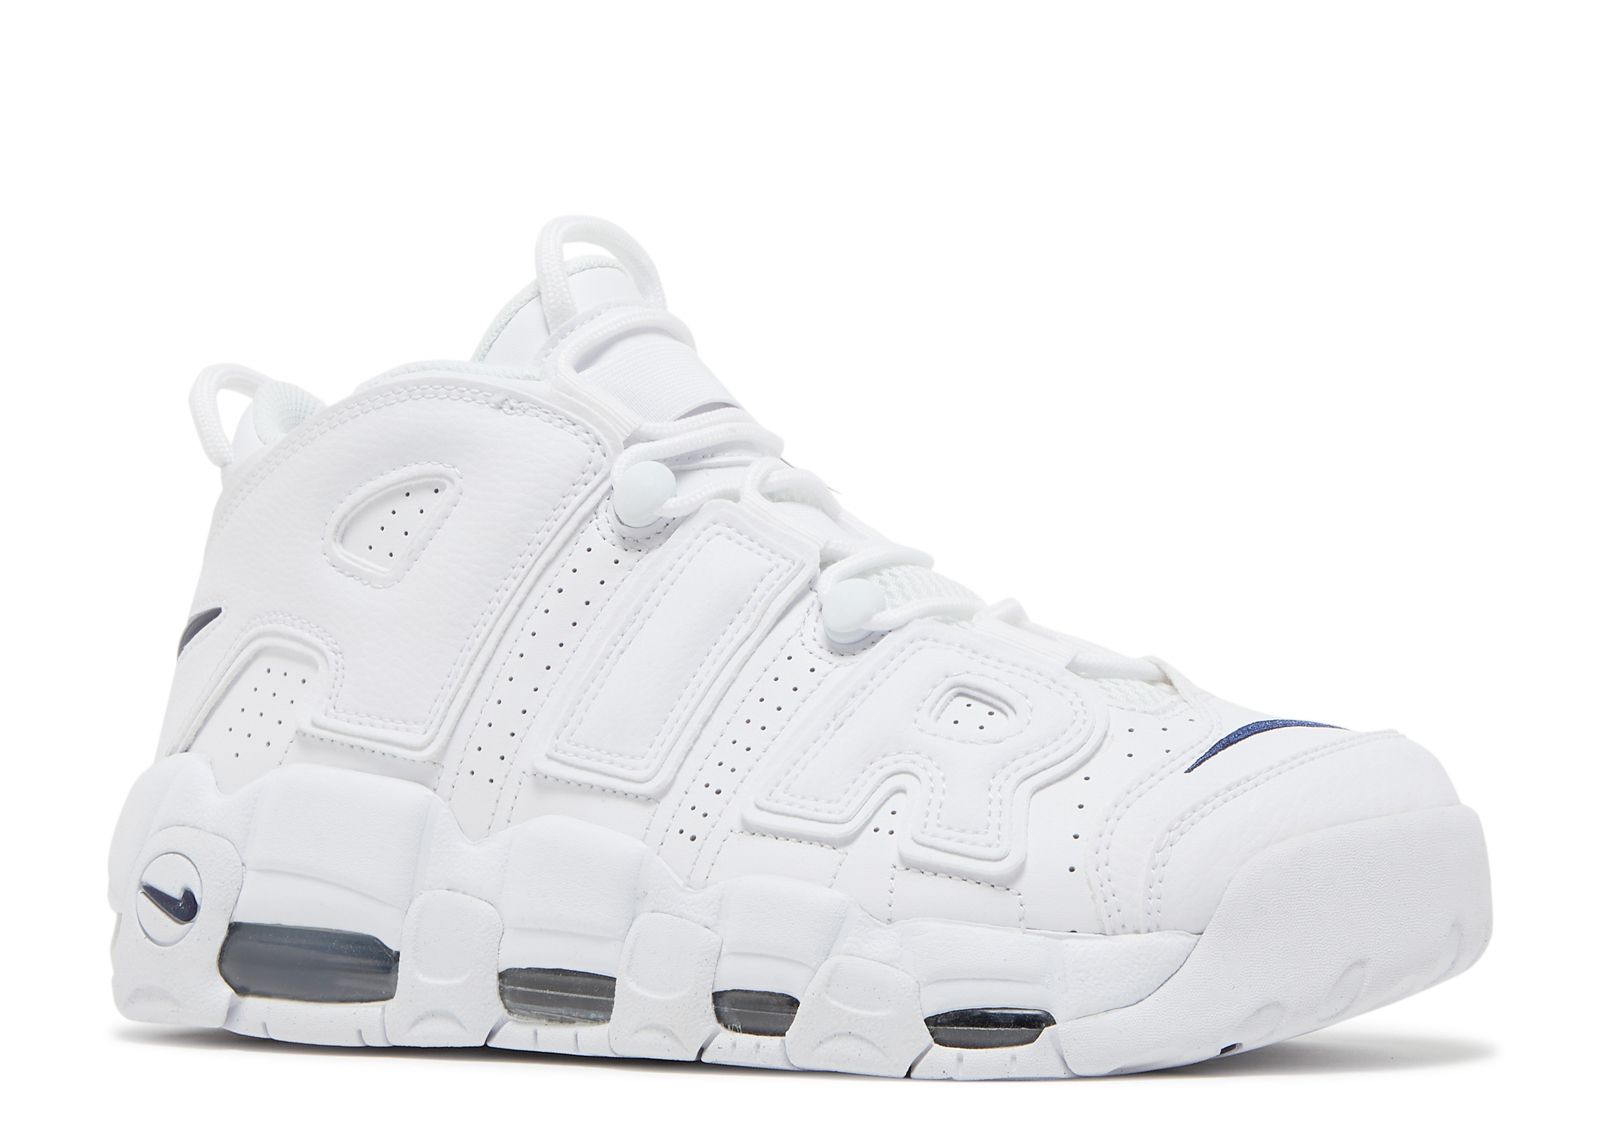 Nike Air More Uptempo White Midnight Navy DH8011-100